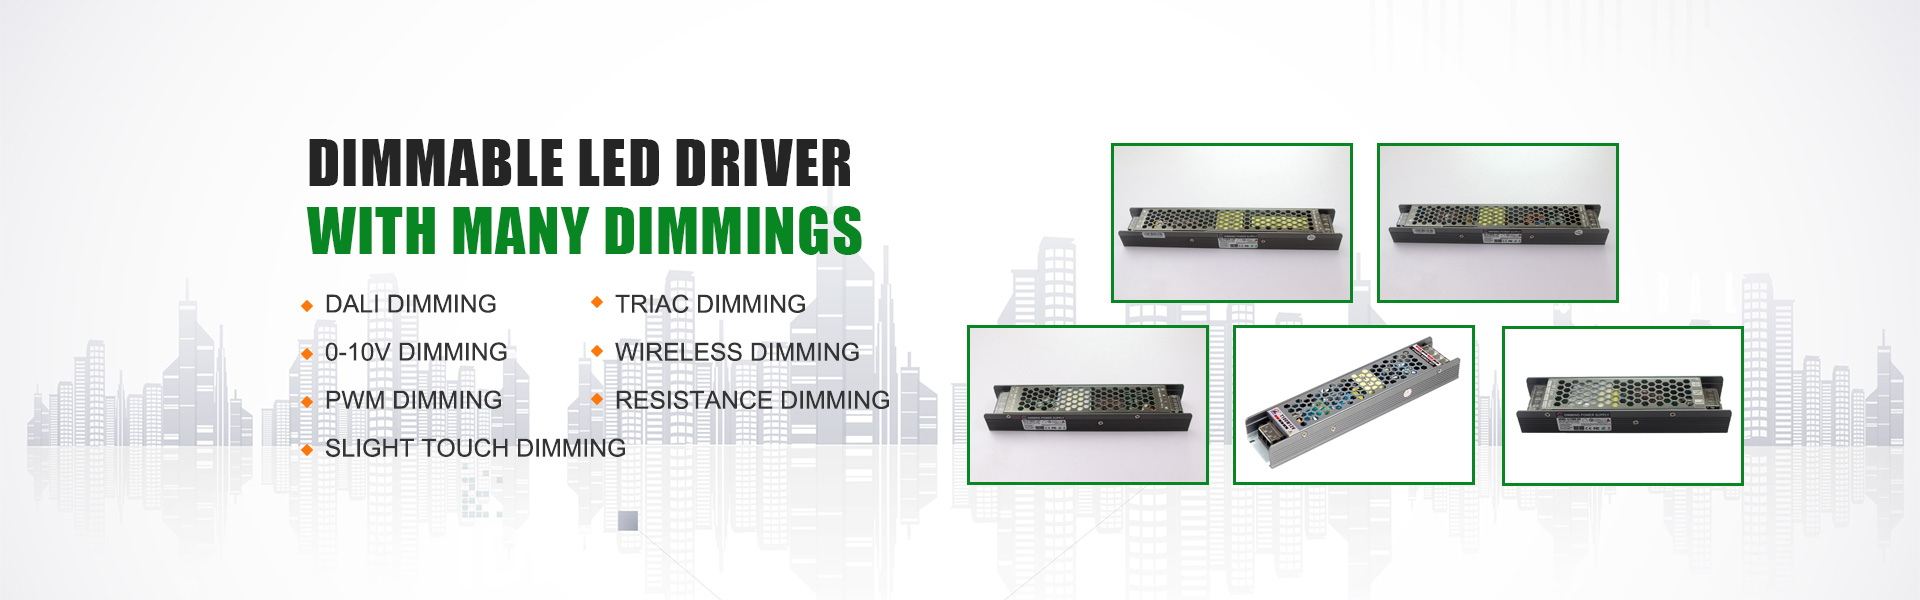 switching power supply,led driver,smps,Dongguan Chengliang Intelligent Technology Co,.Ltd